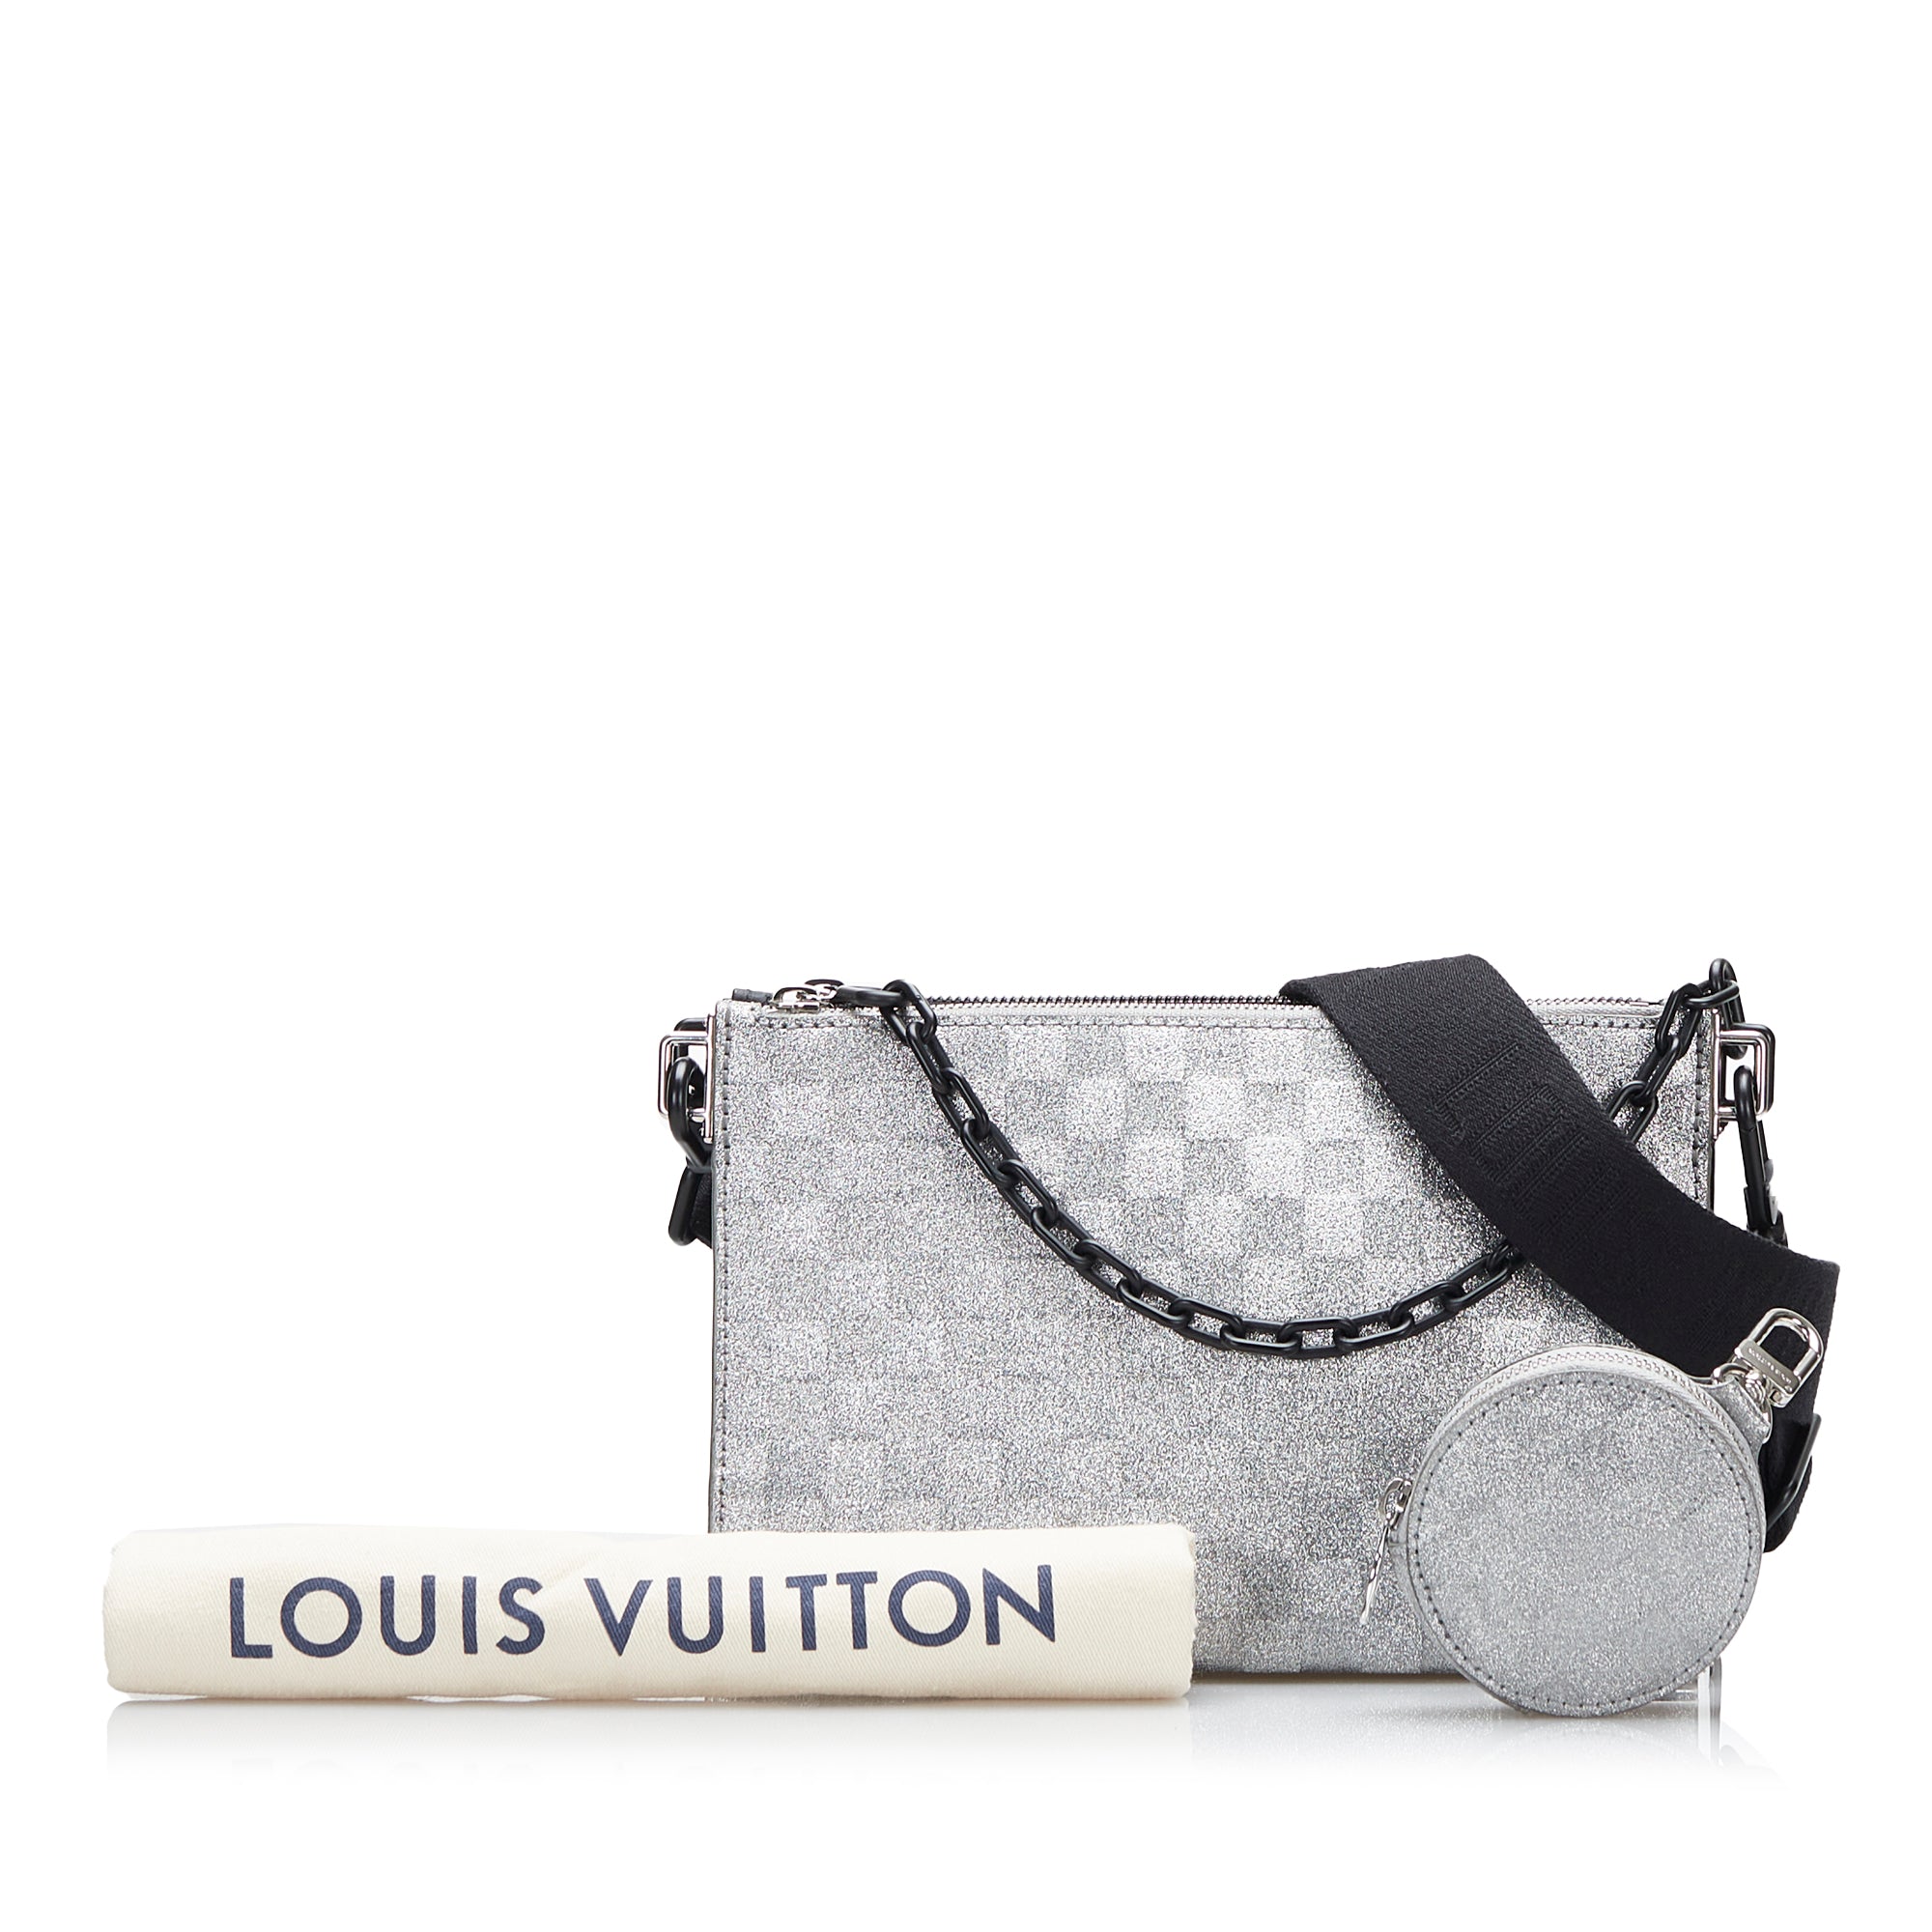 Louis Vuitton Trio Pouch Messenger Bag Damier Glitter Leather and